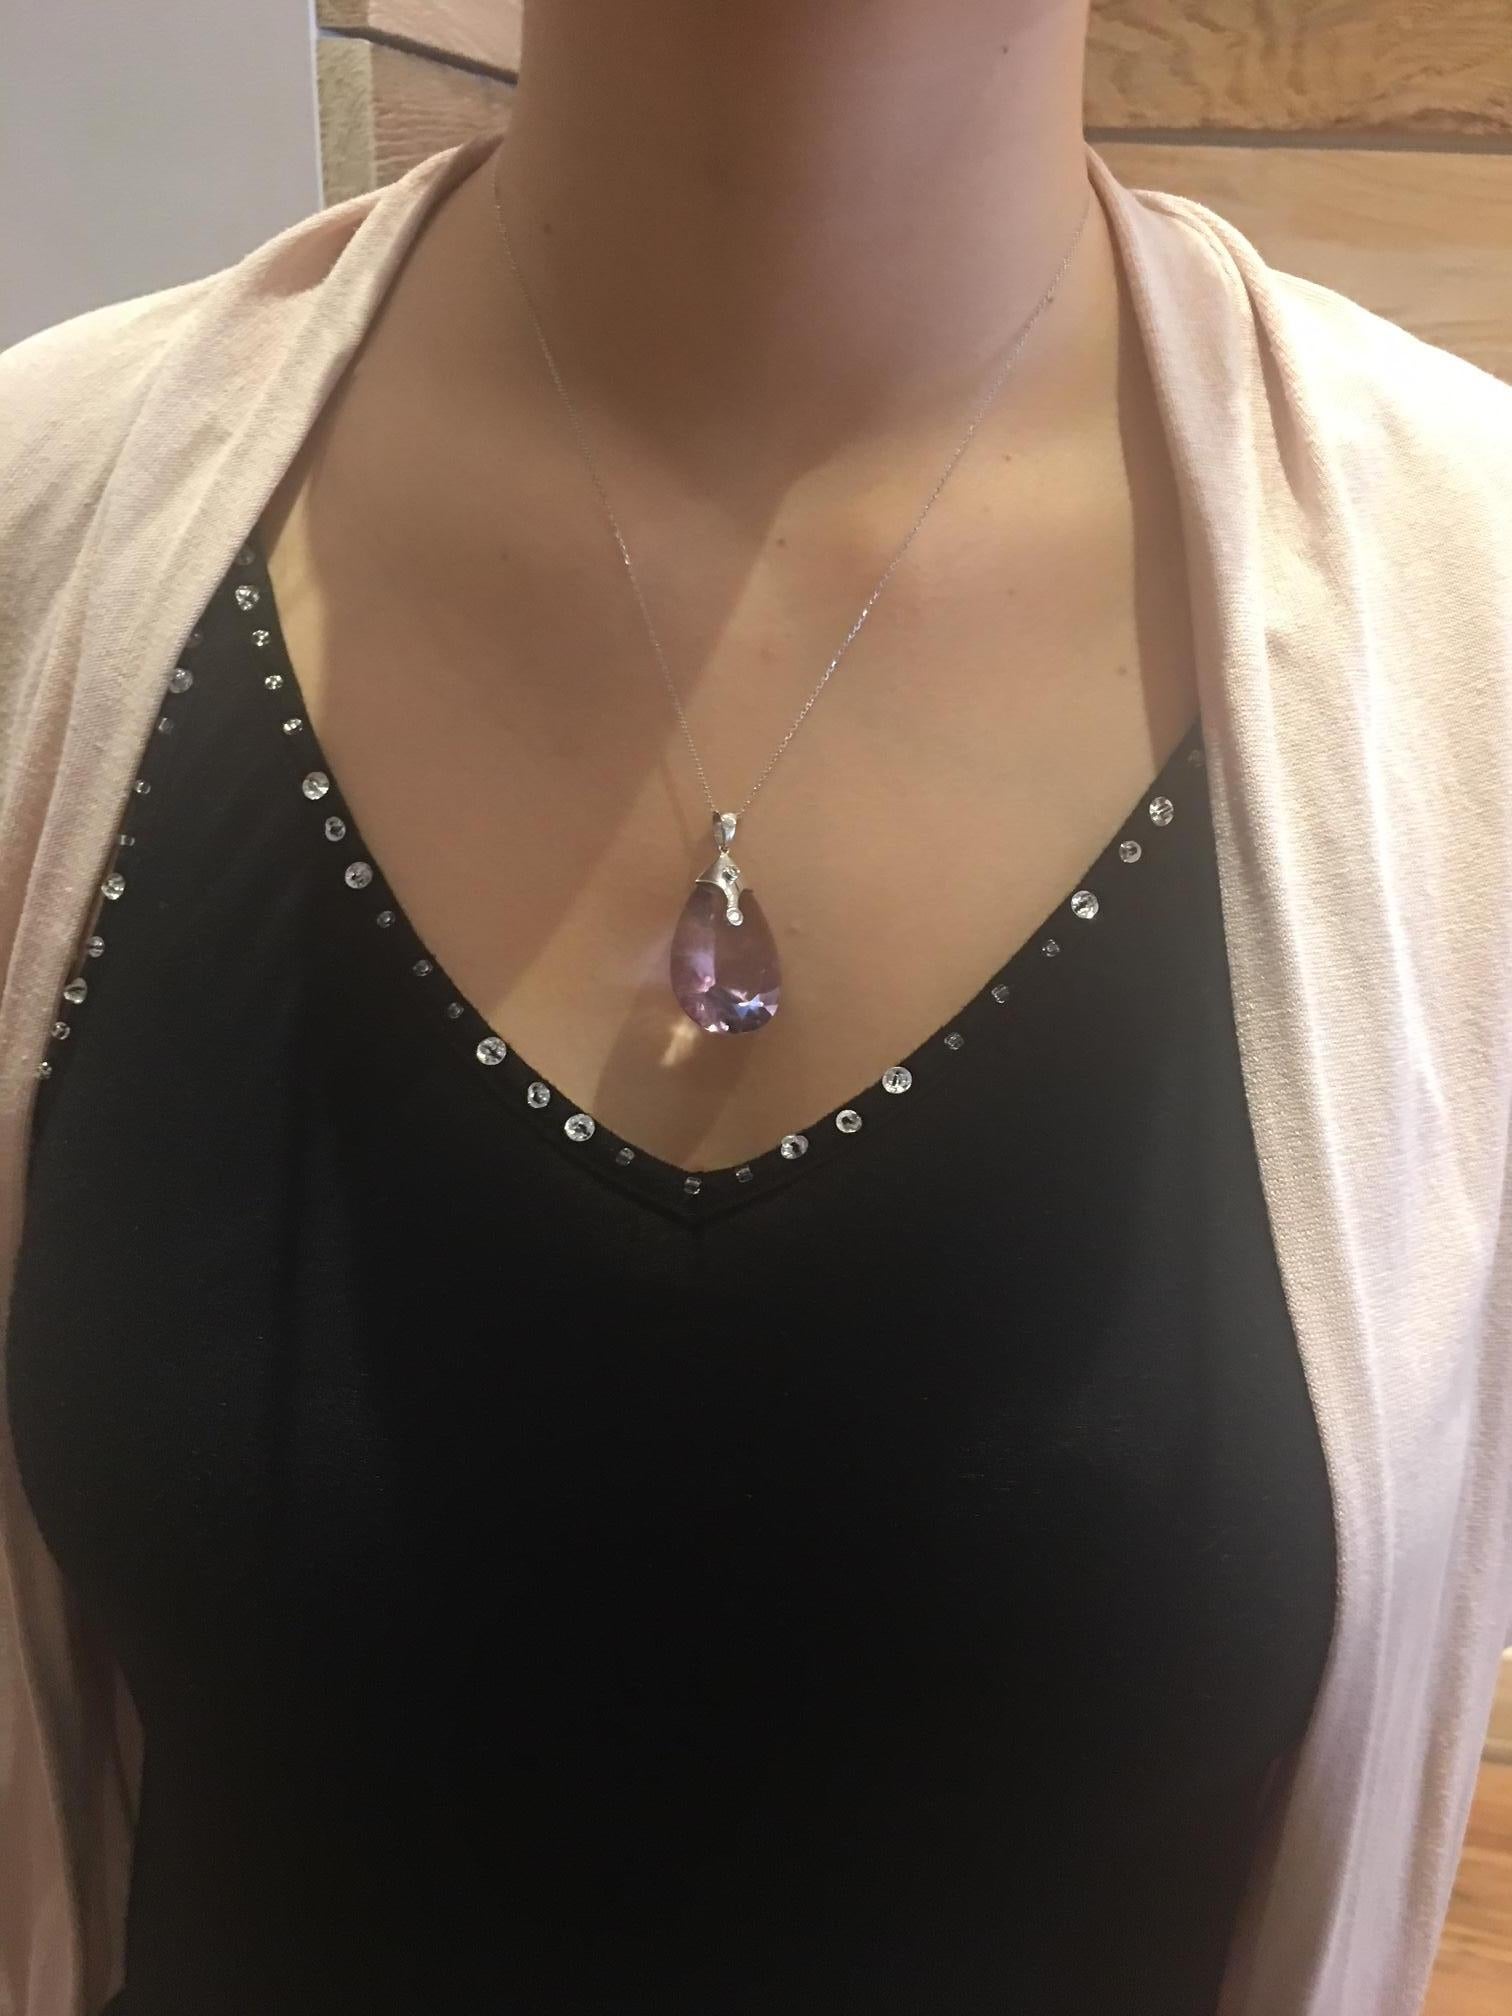 Stunning Necklace showcasing a beautiful 48.5 Carat Teardrop Amethyst enhanced with 2 Diamonds, weighing approx. 0.03 carat and 0.05 carat. Hand crafted in 18K white Gold and suspended from a 19 inch white Gold chain. A Perfect